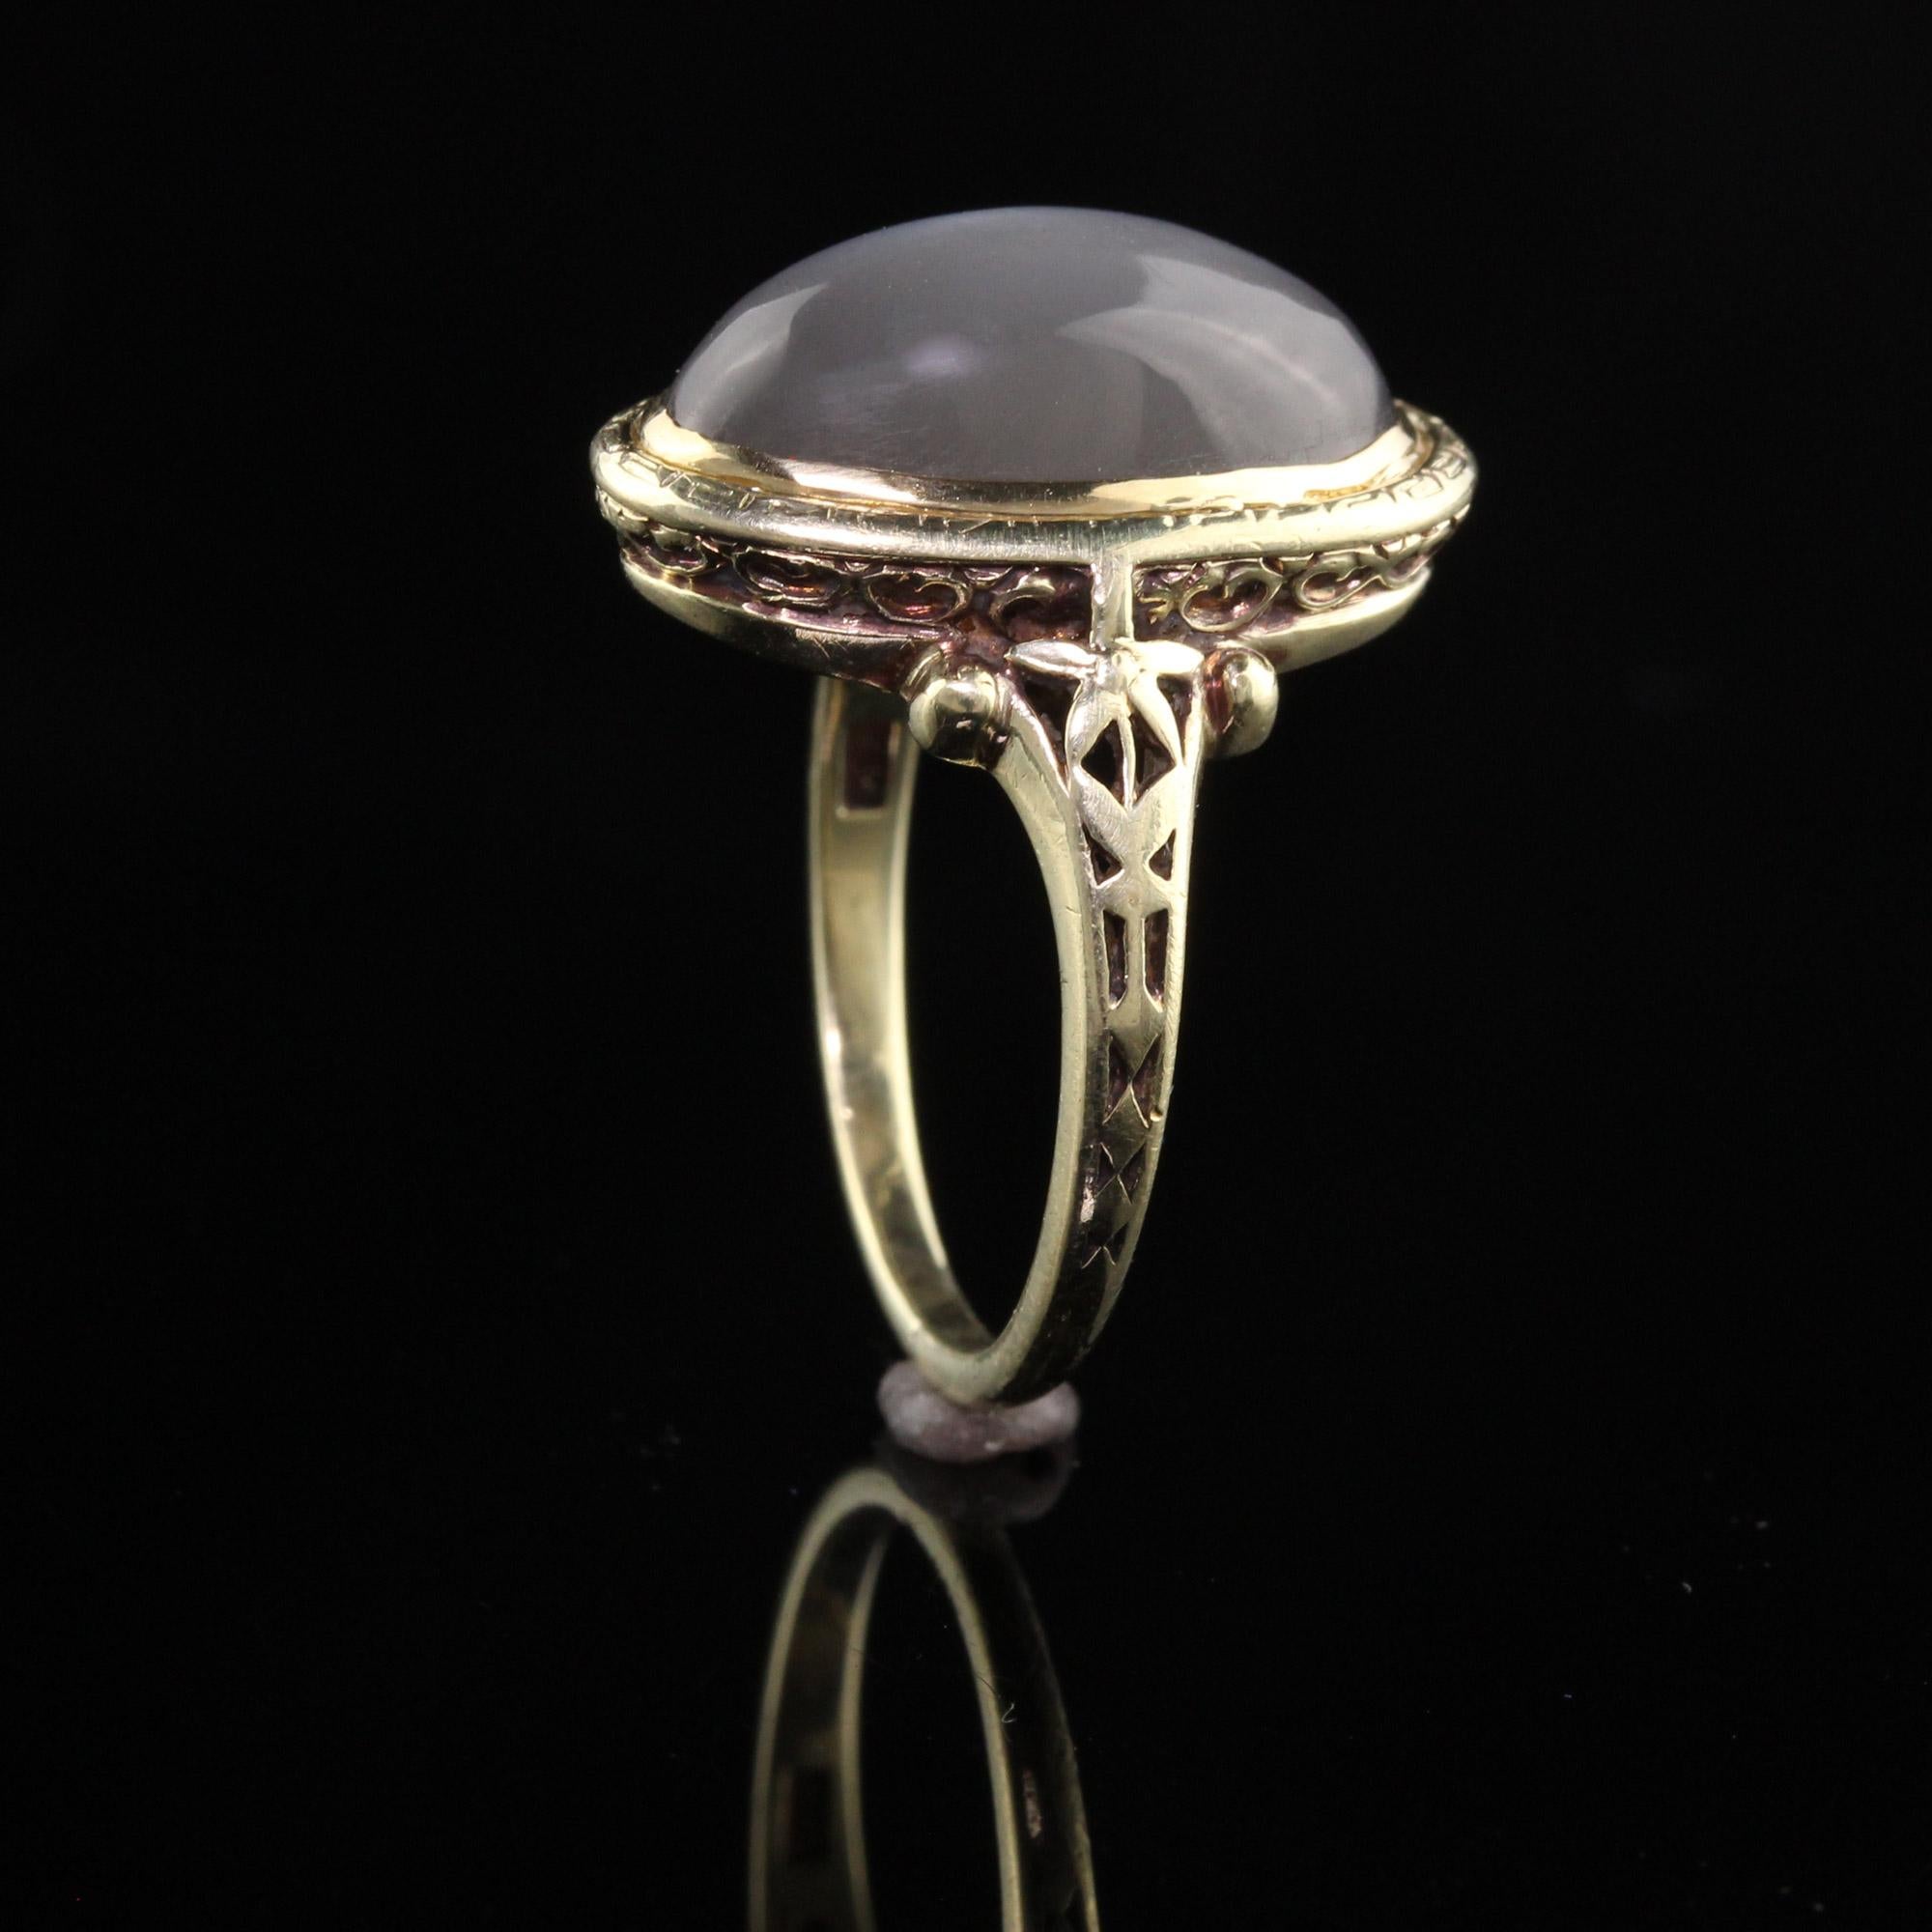 Antique Art Deco 14K Yellow Gold Moonstone Filigree Ring In Good Condition For Sale In Great Neck, NY